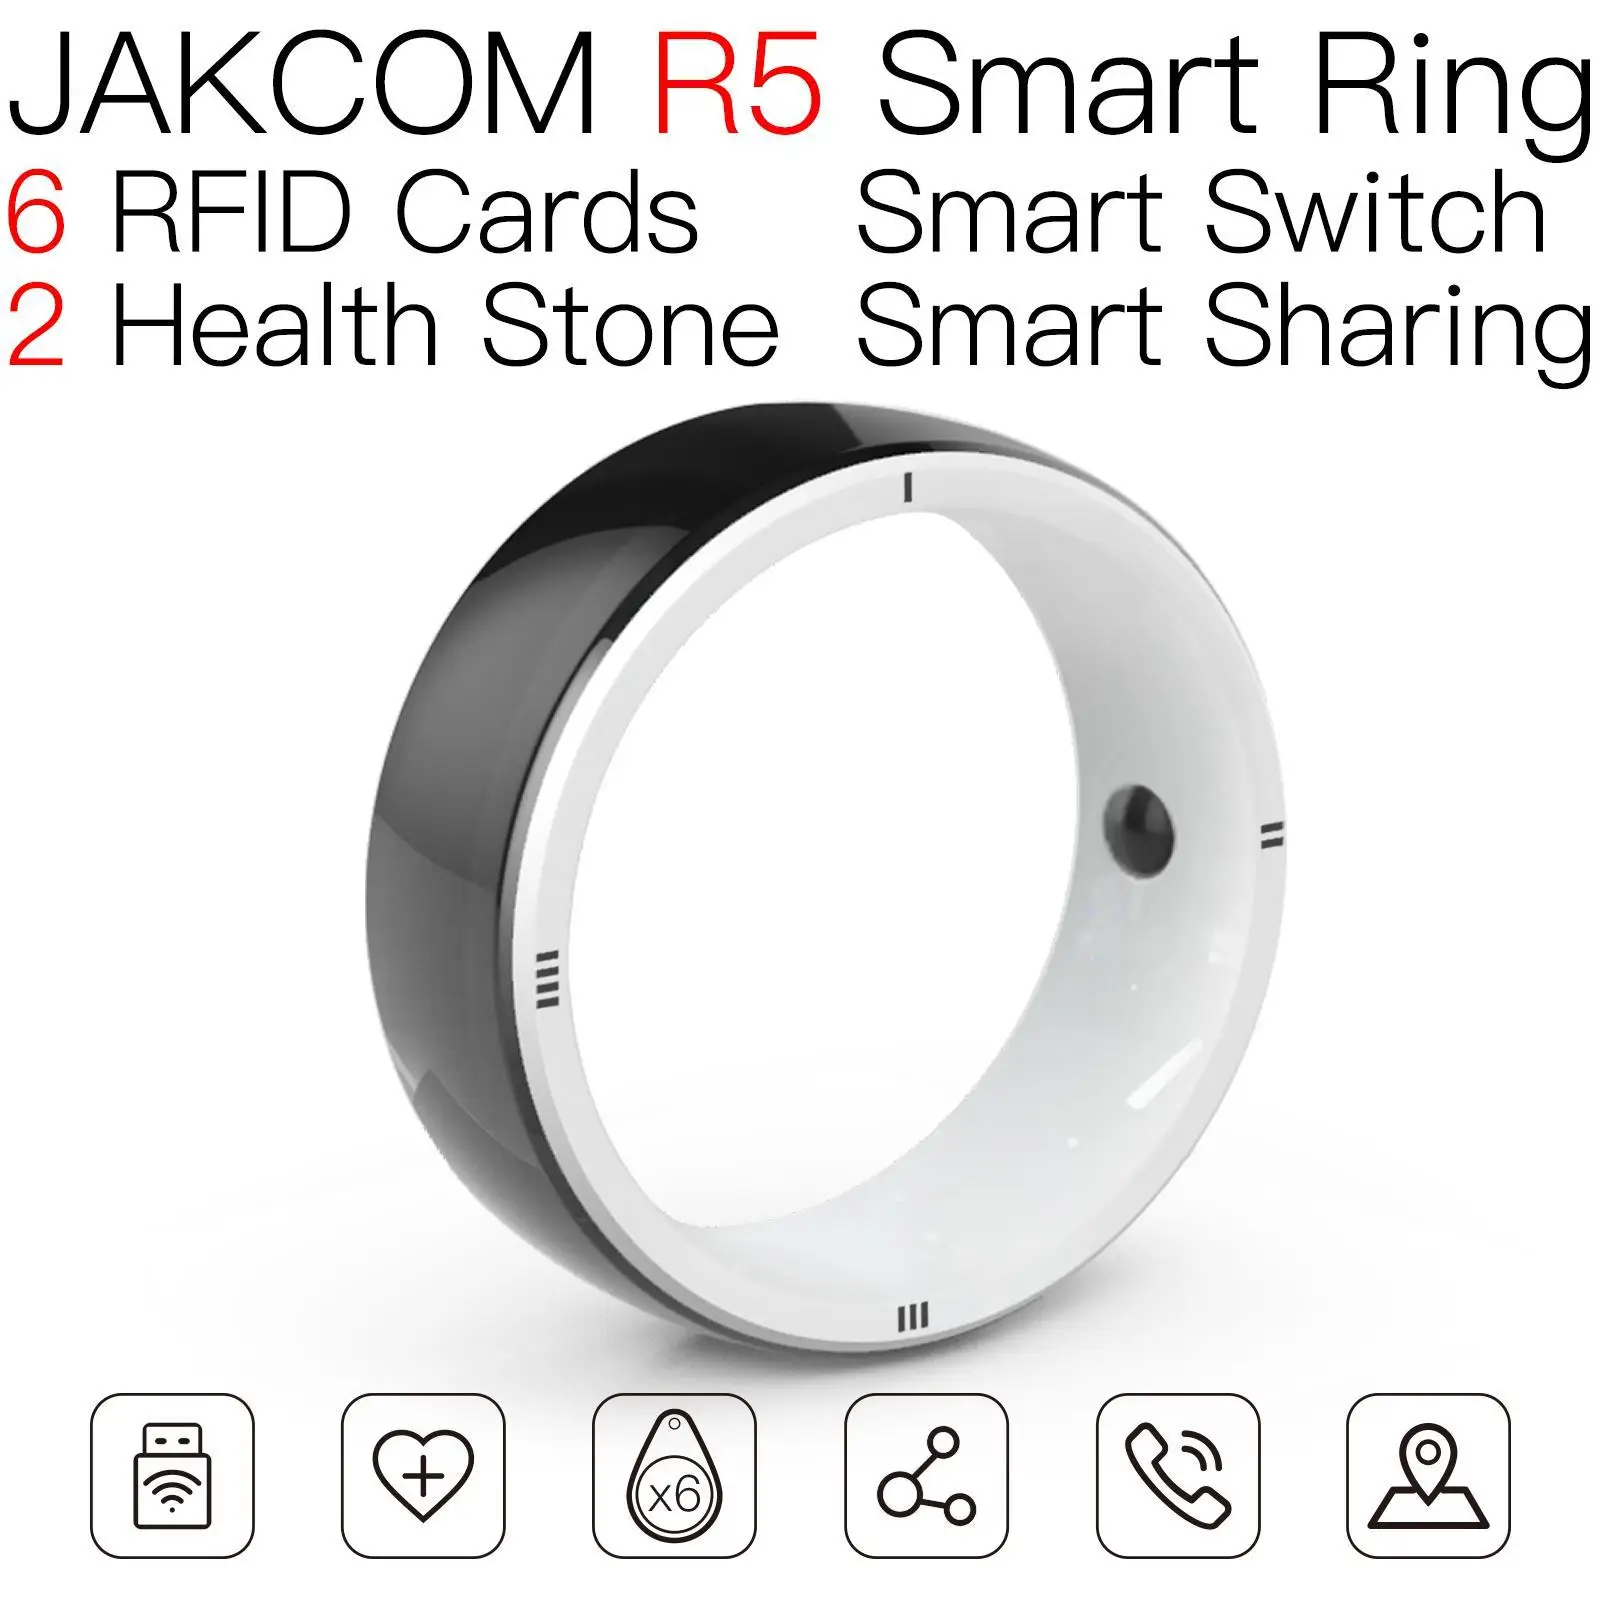 

JAKCOM R5 Smart Ring New product as 65w bank mobile phones watch buds shaker protein bv9300 legend 2 xiao